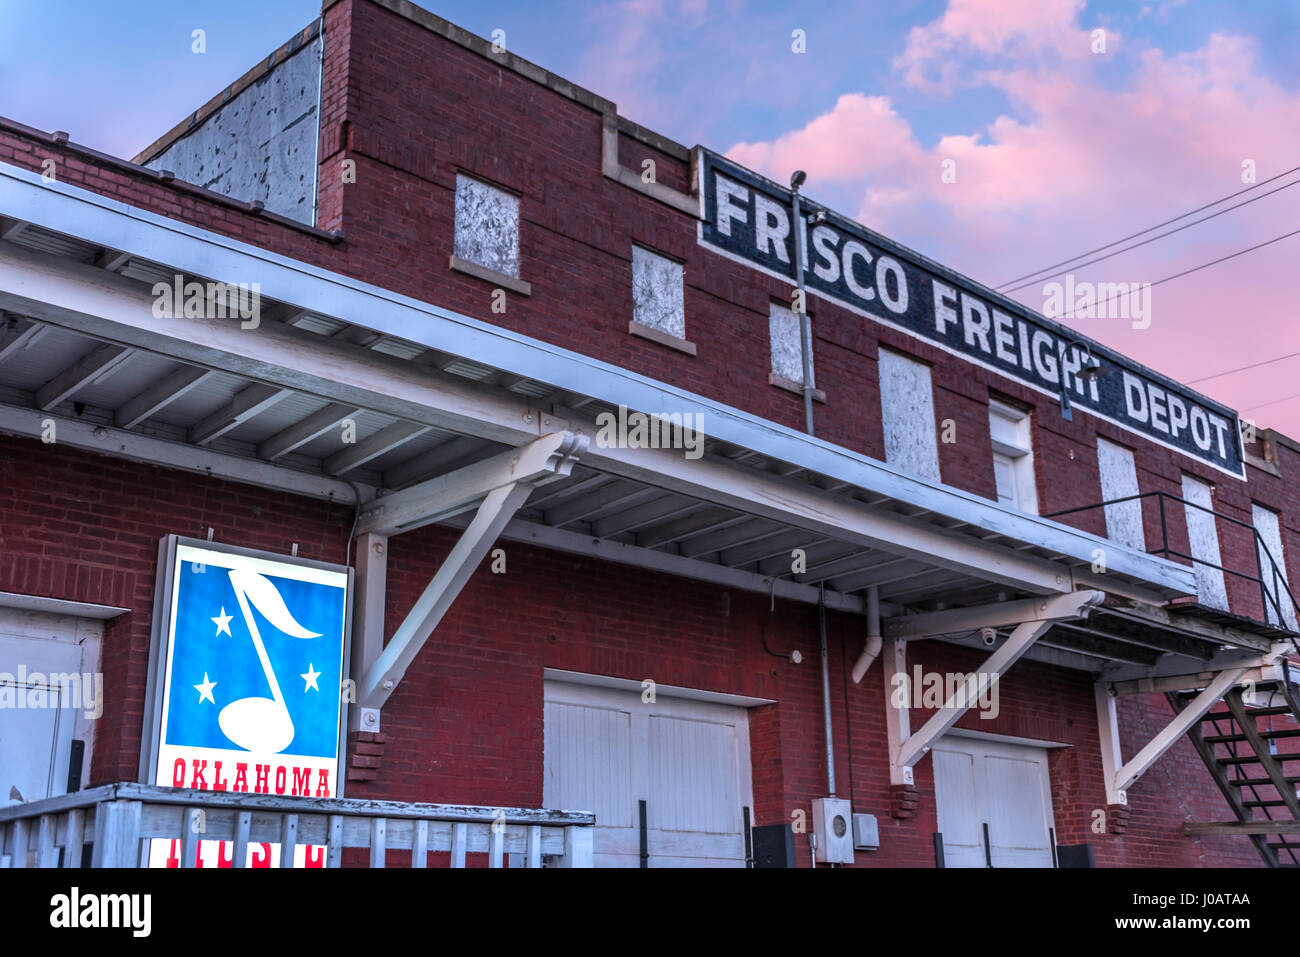 Muskogee, Oklahoma's Frisco Freight Depot, accueil de l'Alabama Music Hall of Fame. (USA) Banque D'Images